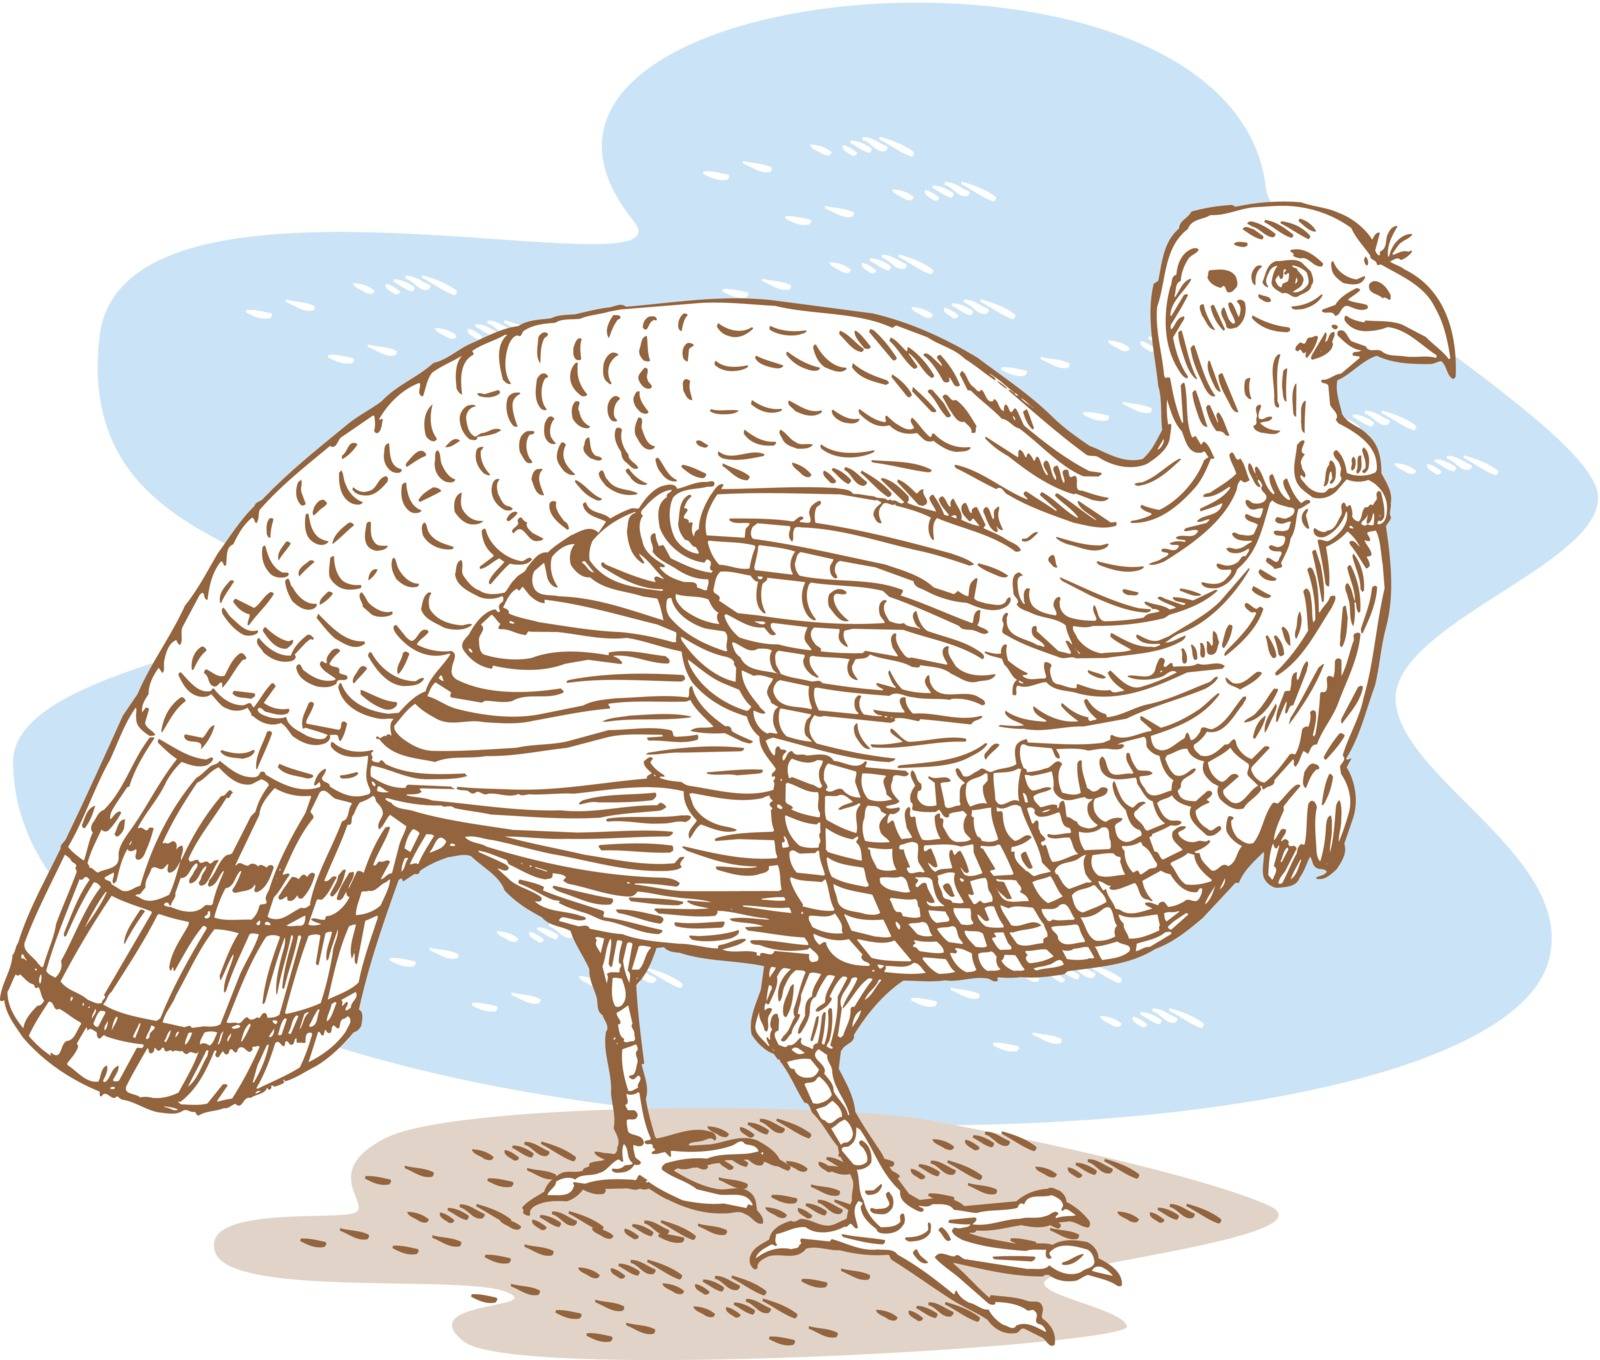 Illustration of a turkey viewed from the side.